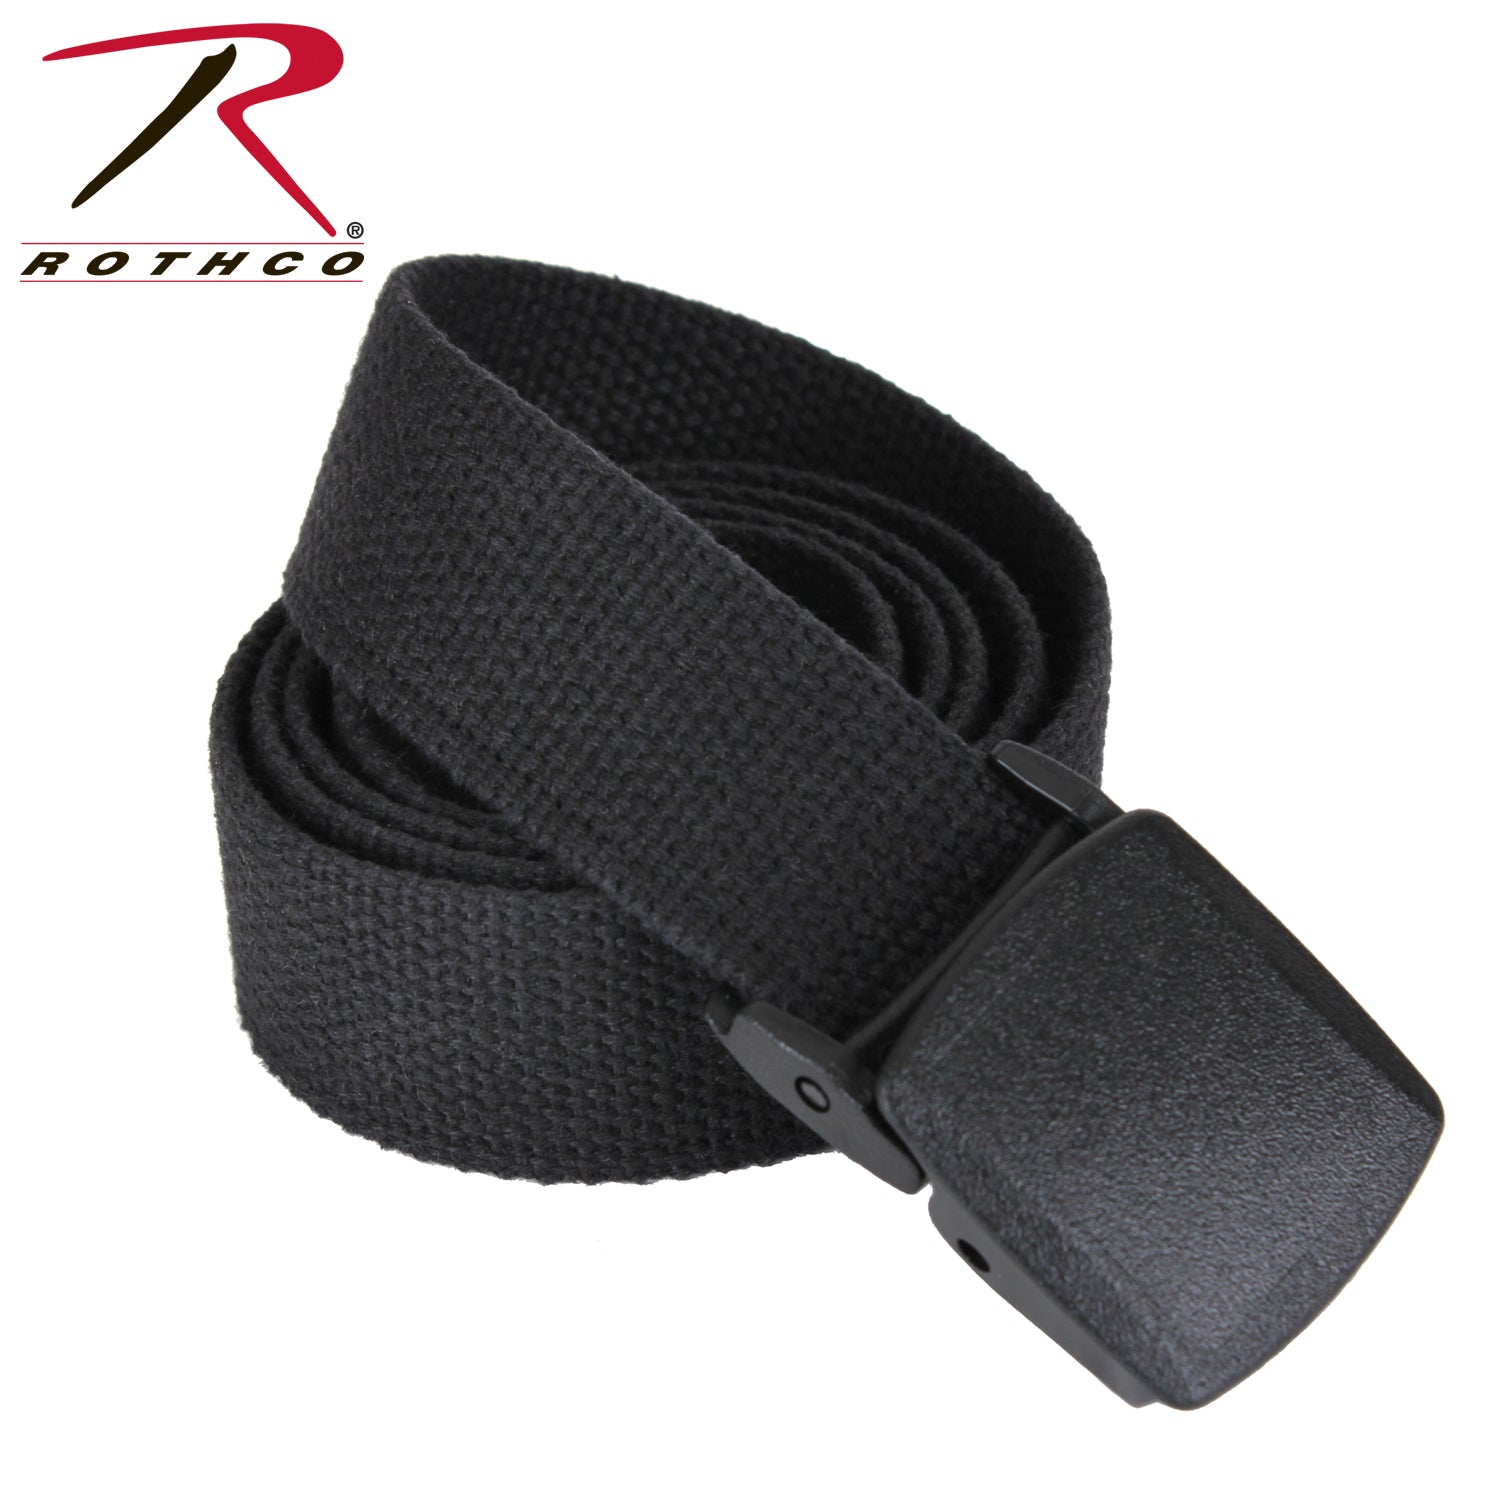 Rothco Military Plastic Buckle Web Belt - 54 Inch - Tactical Choice Plus